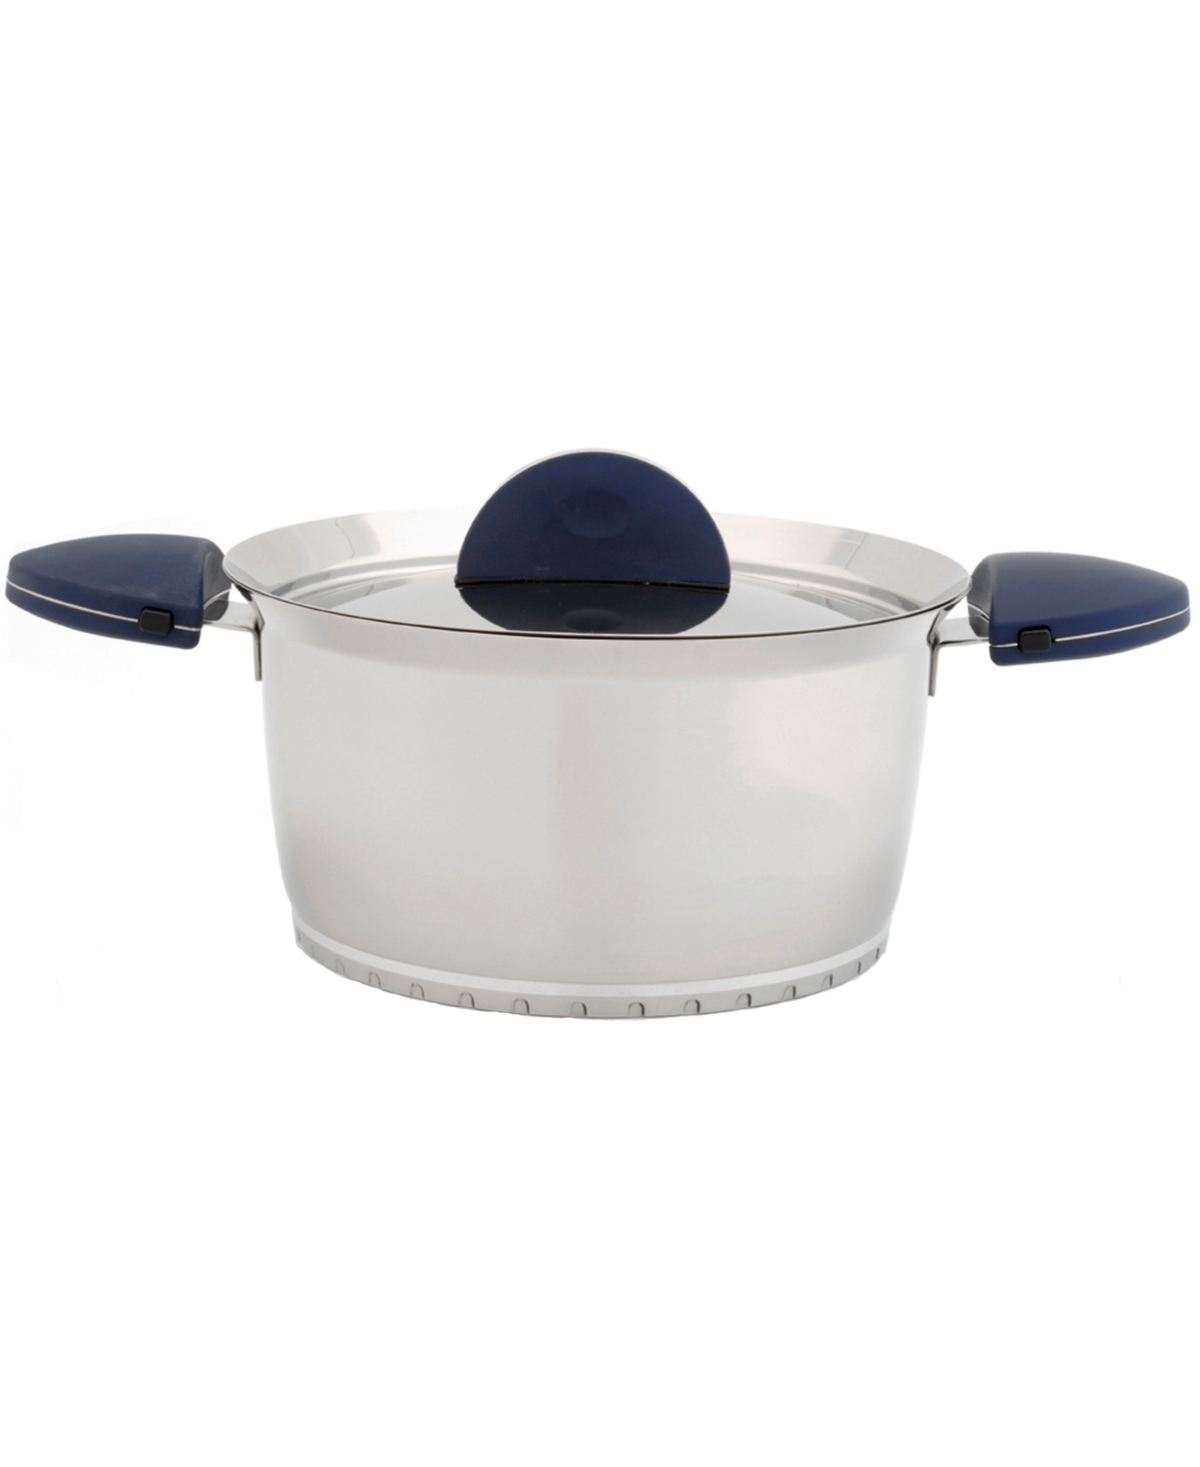 BergHOFF Stacca Stainless Steel 3-Qt. Covered Casserole, Blue